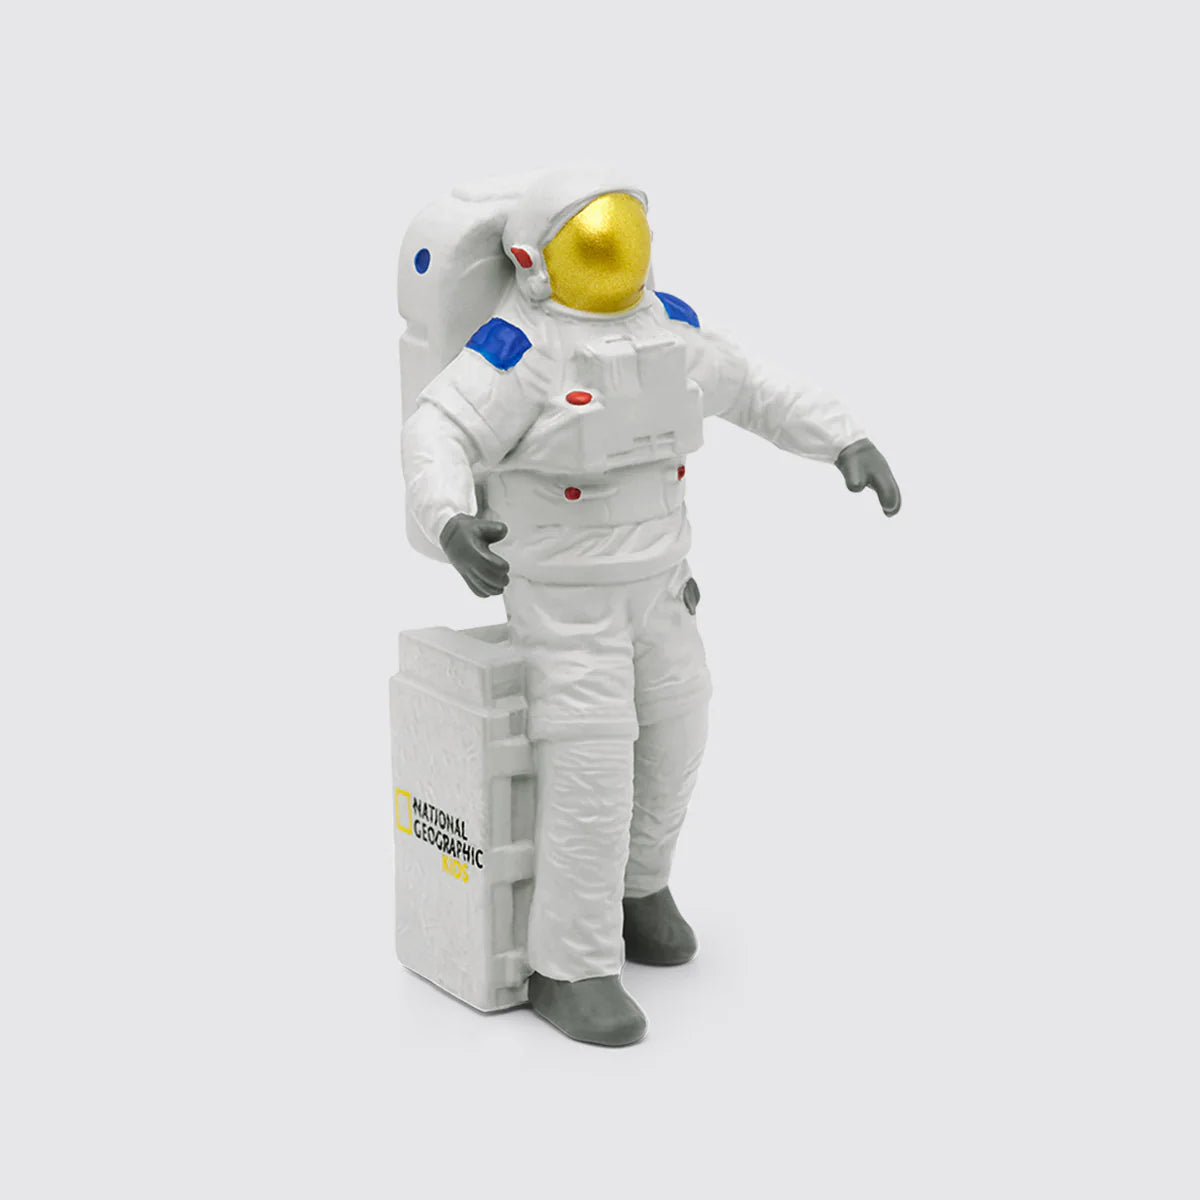 National Geographic: Astronaut by Tonies #10000795